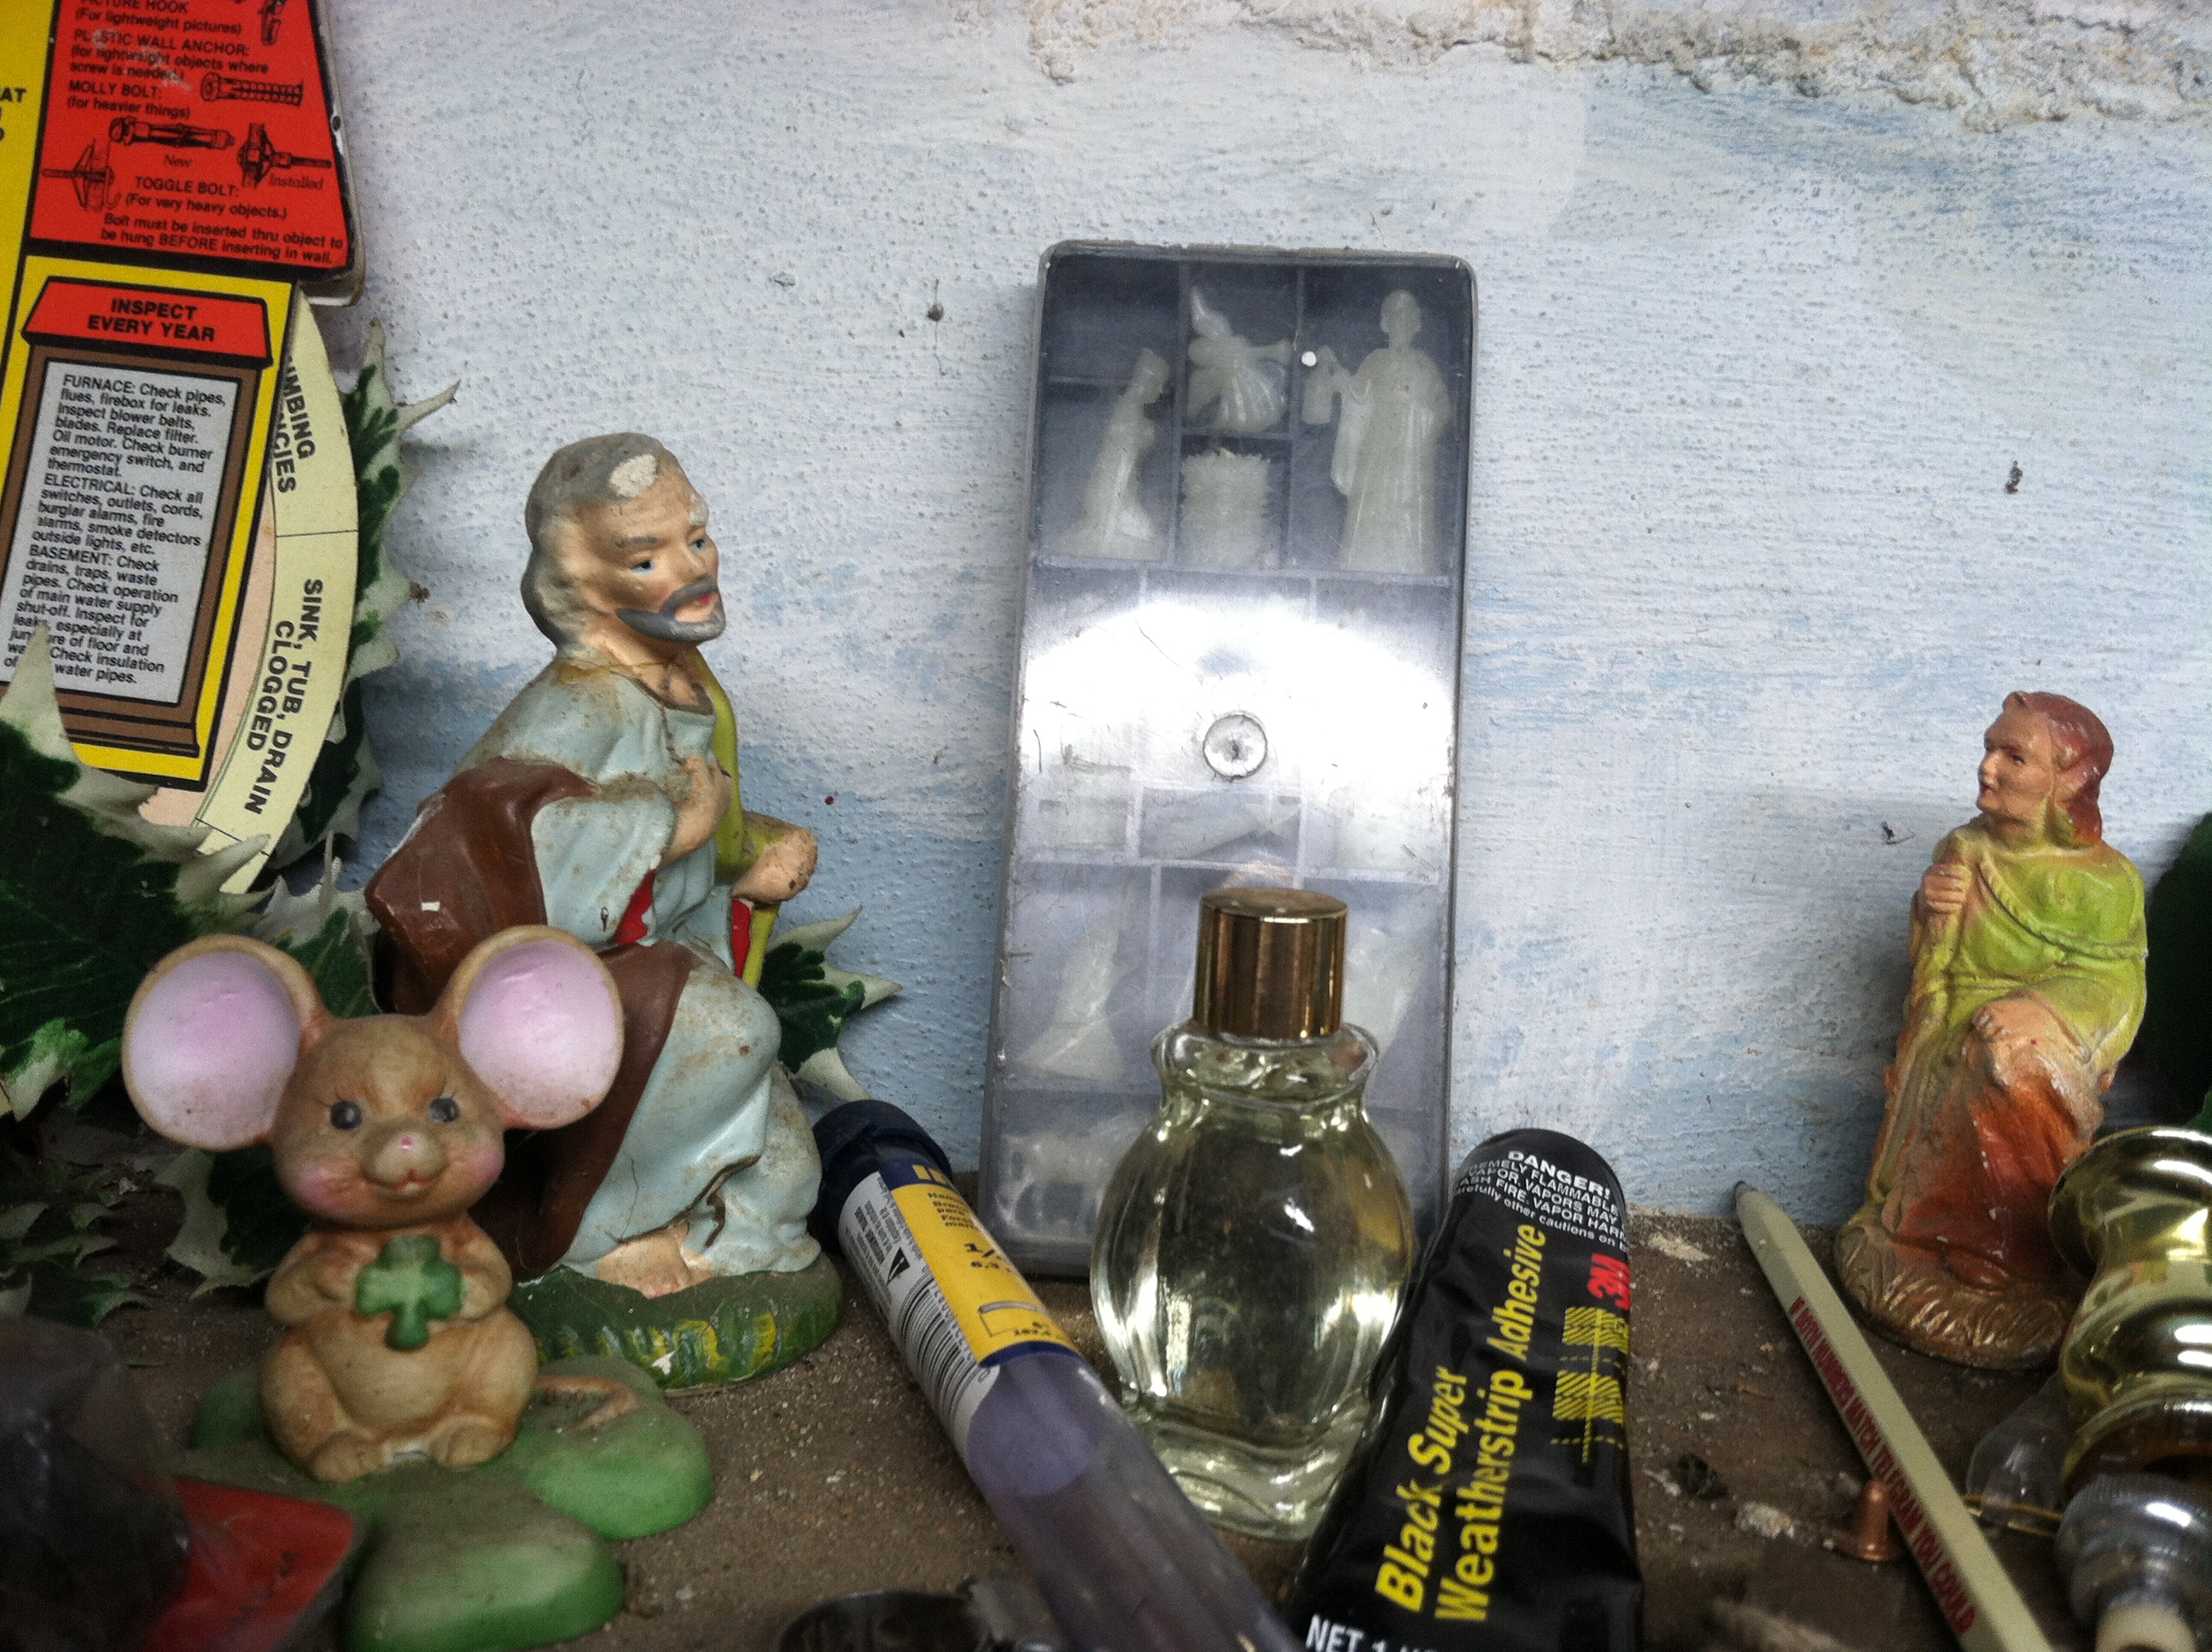 St. Joe, an unnamed shepherd, a large mouse and tiny saint statues along with cologne?